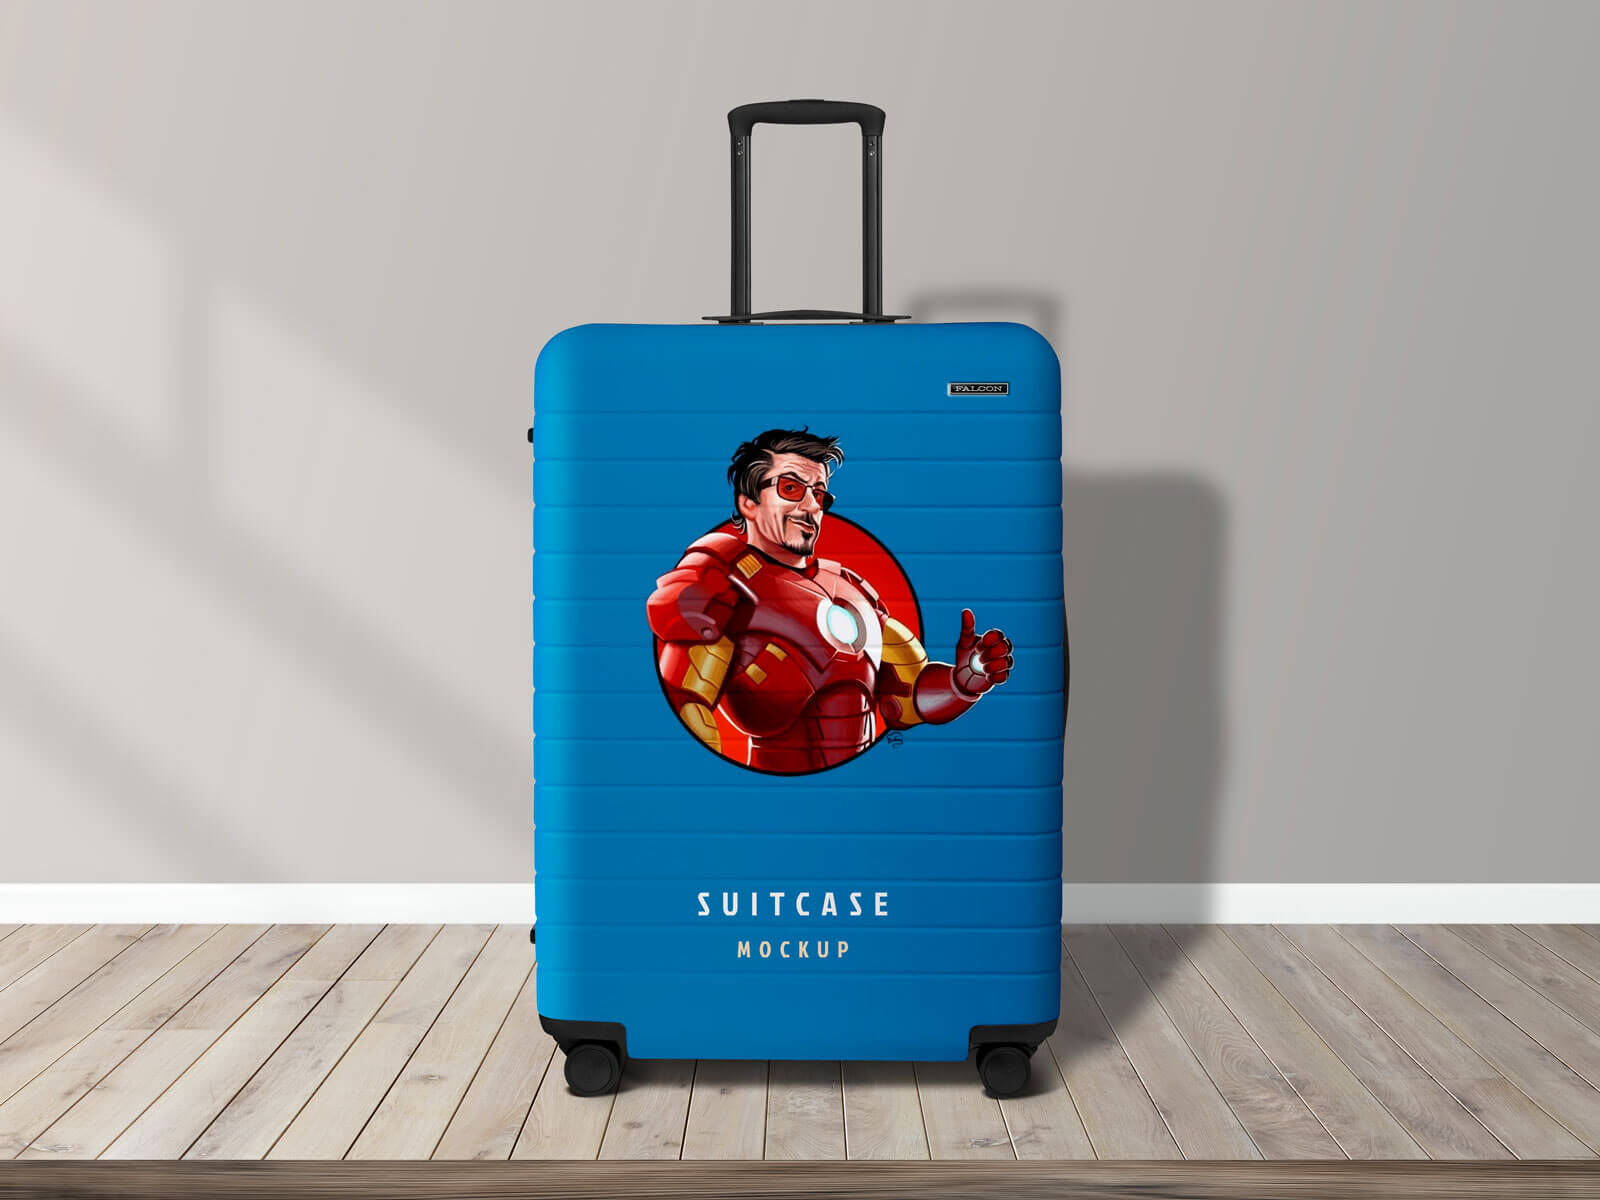 Fancy Travel Luggage Suitcase On Wooden Floor Mockup FREE PSD